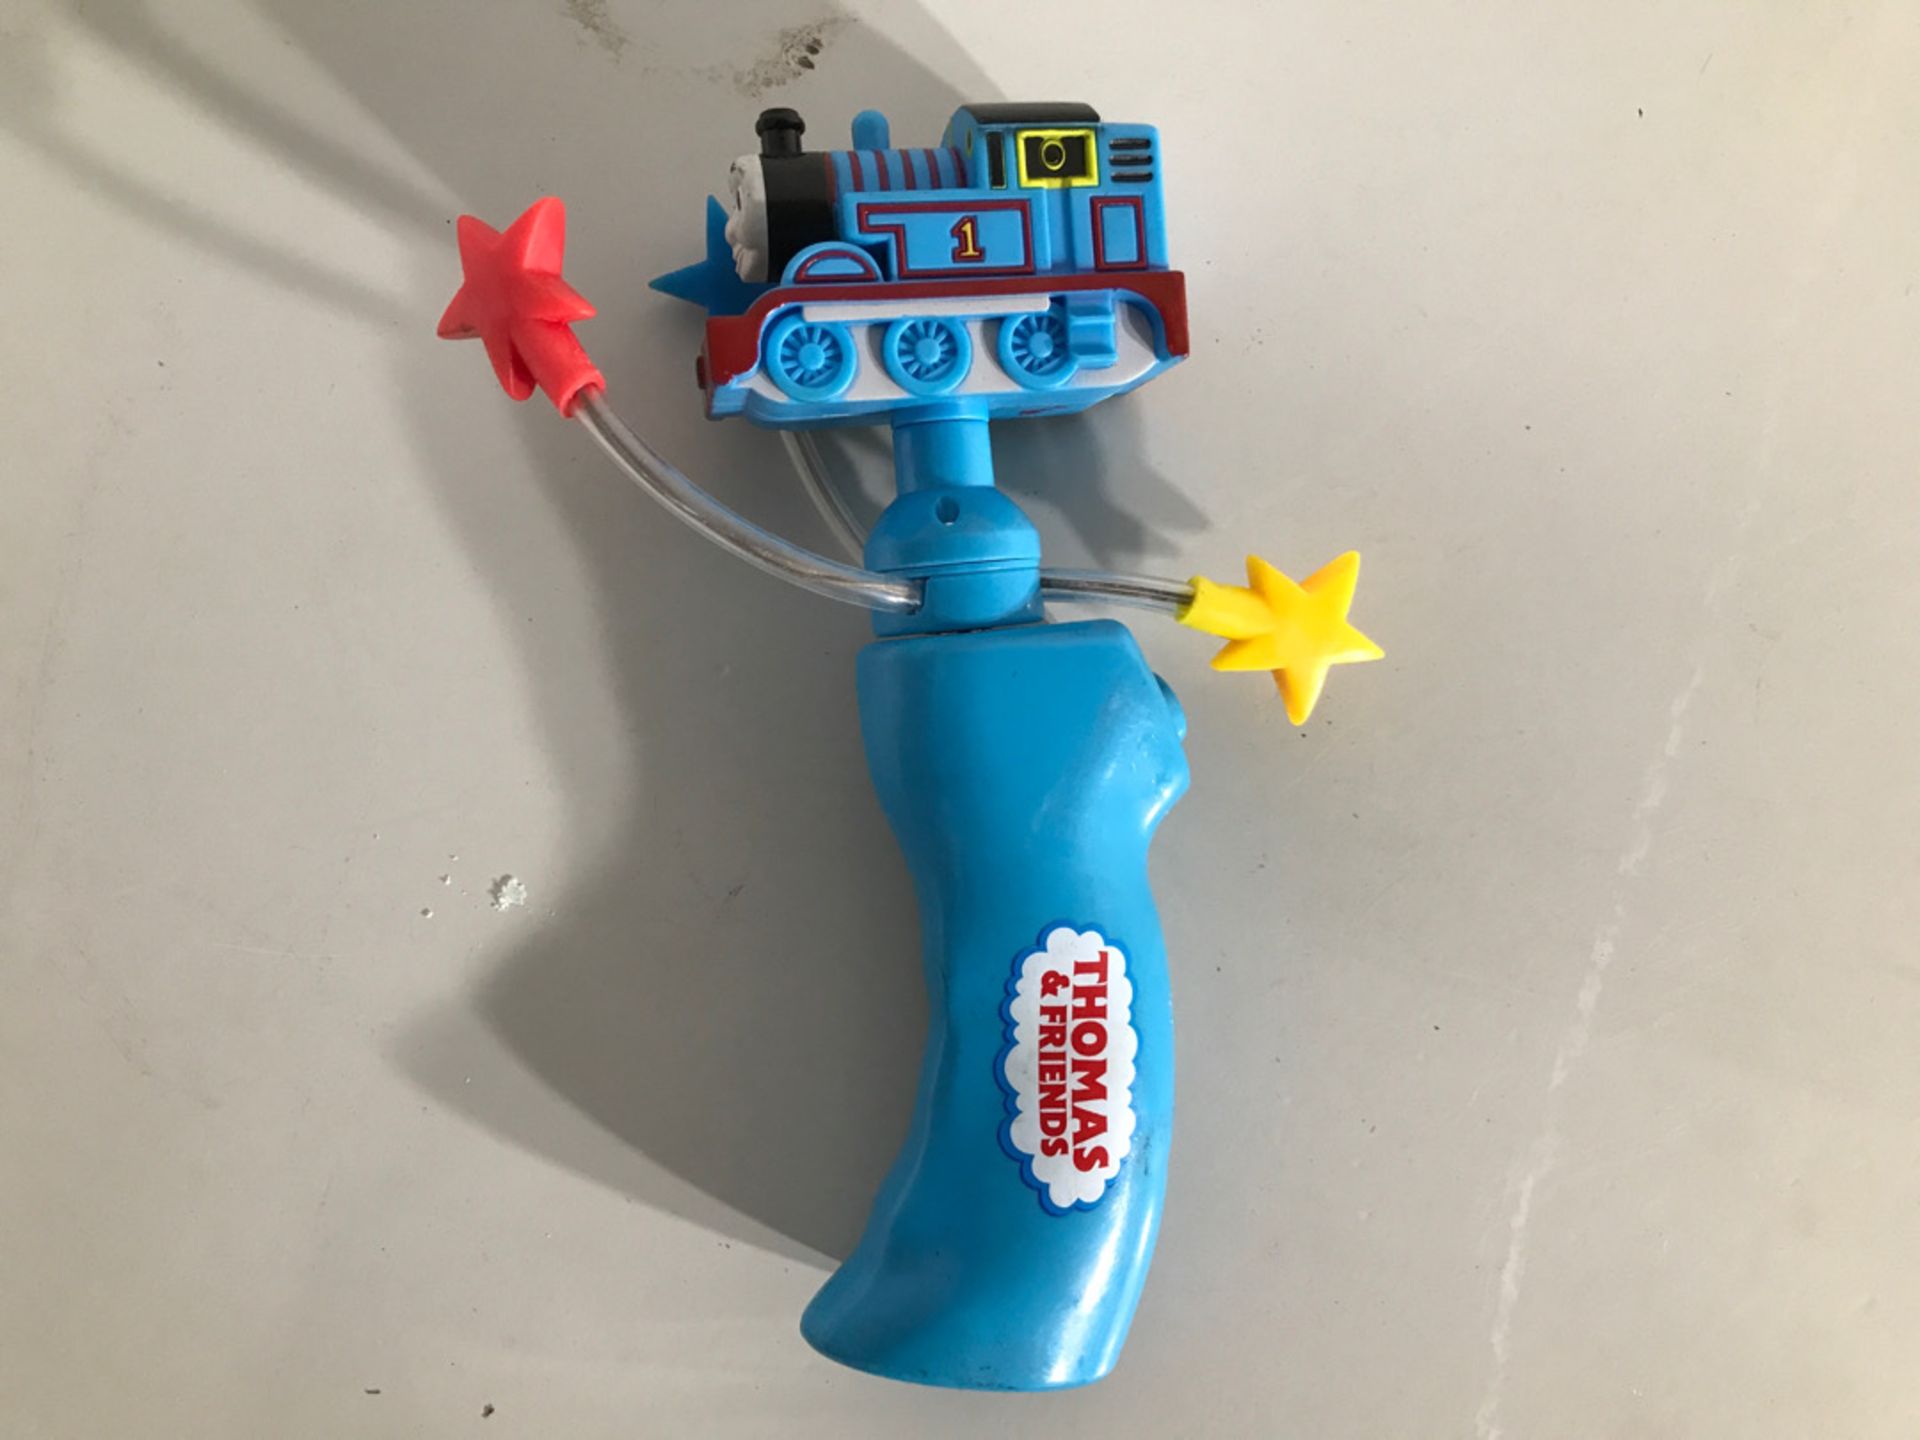 Thomas the tank engine battery operated spinner - Image 4 of 4